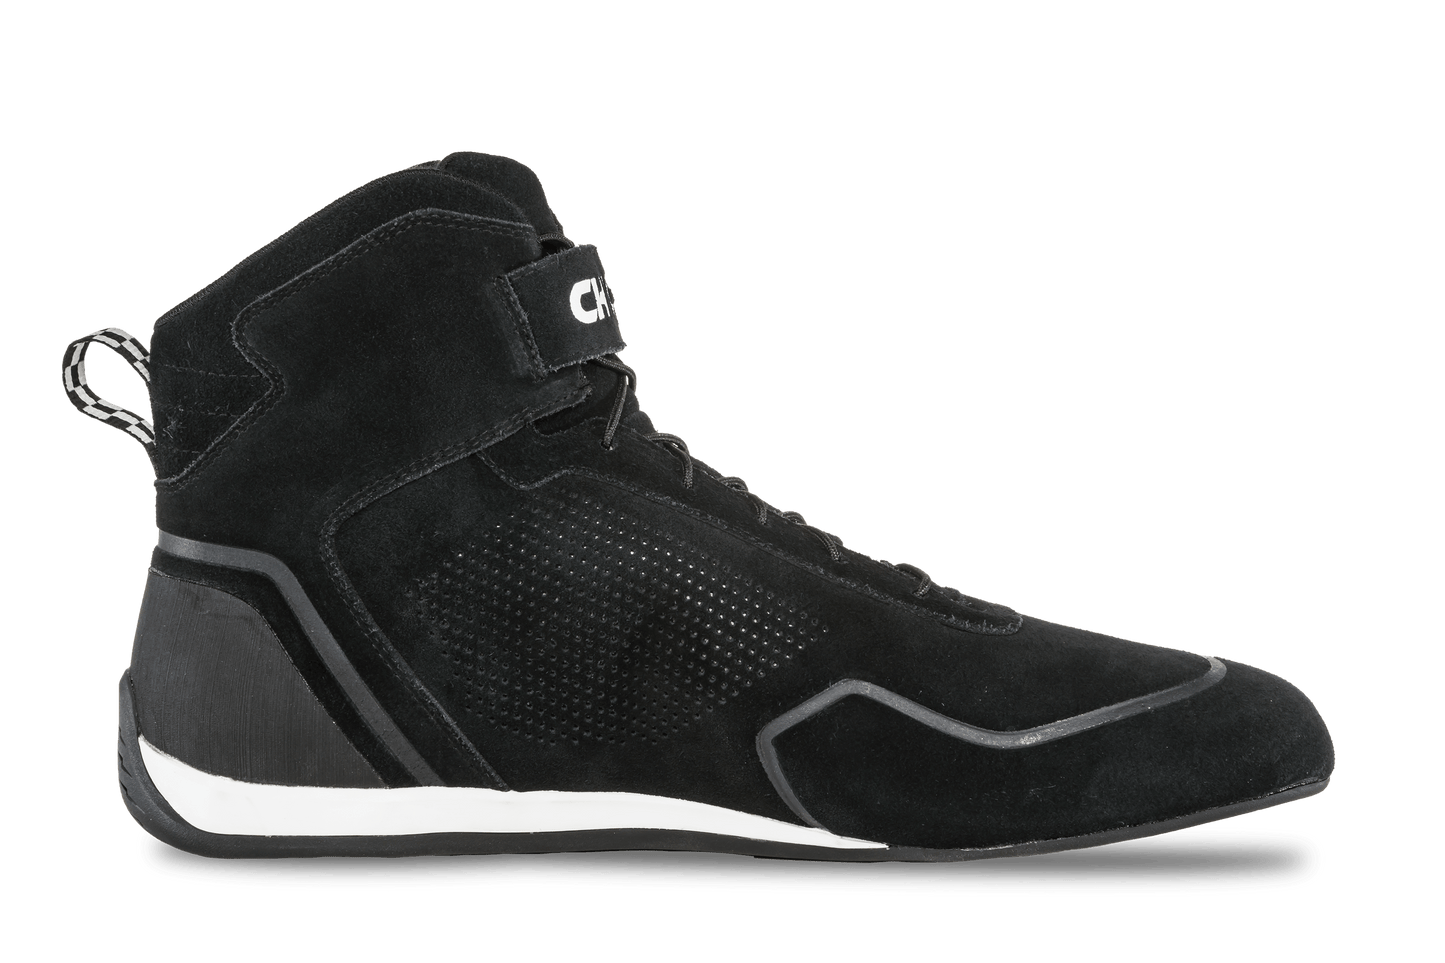 Chicane Men's GT3 - Black – Chicane - The Sole of Racing